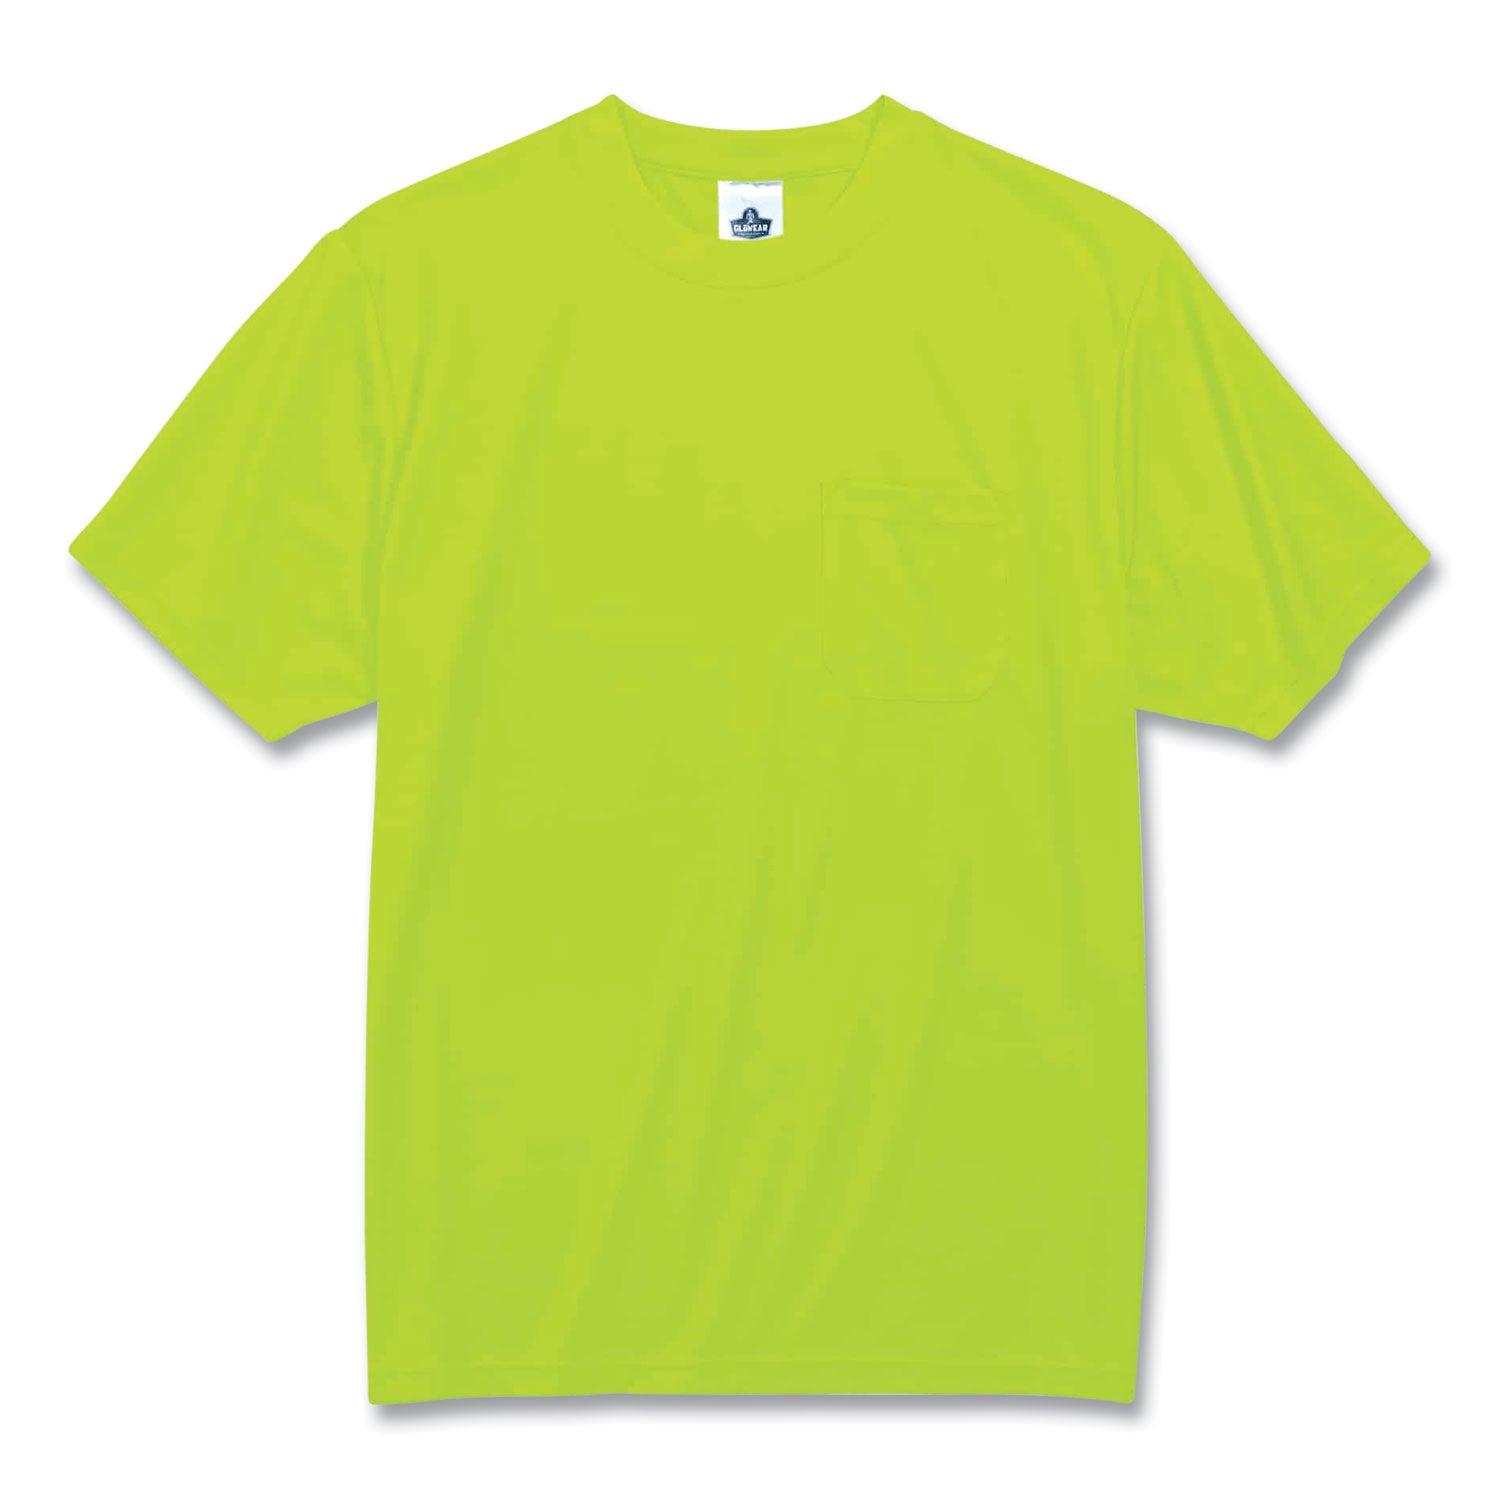 glowear-8089-non-certified-hi-vis-t-shirt-polyester-x-large-lime-ships-in-1-3-business-days_ego21555 - 1